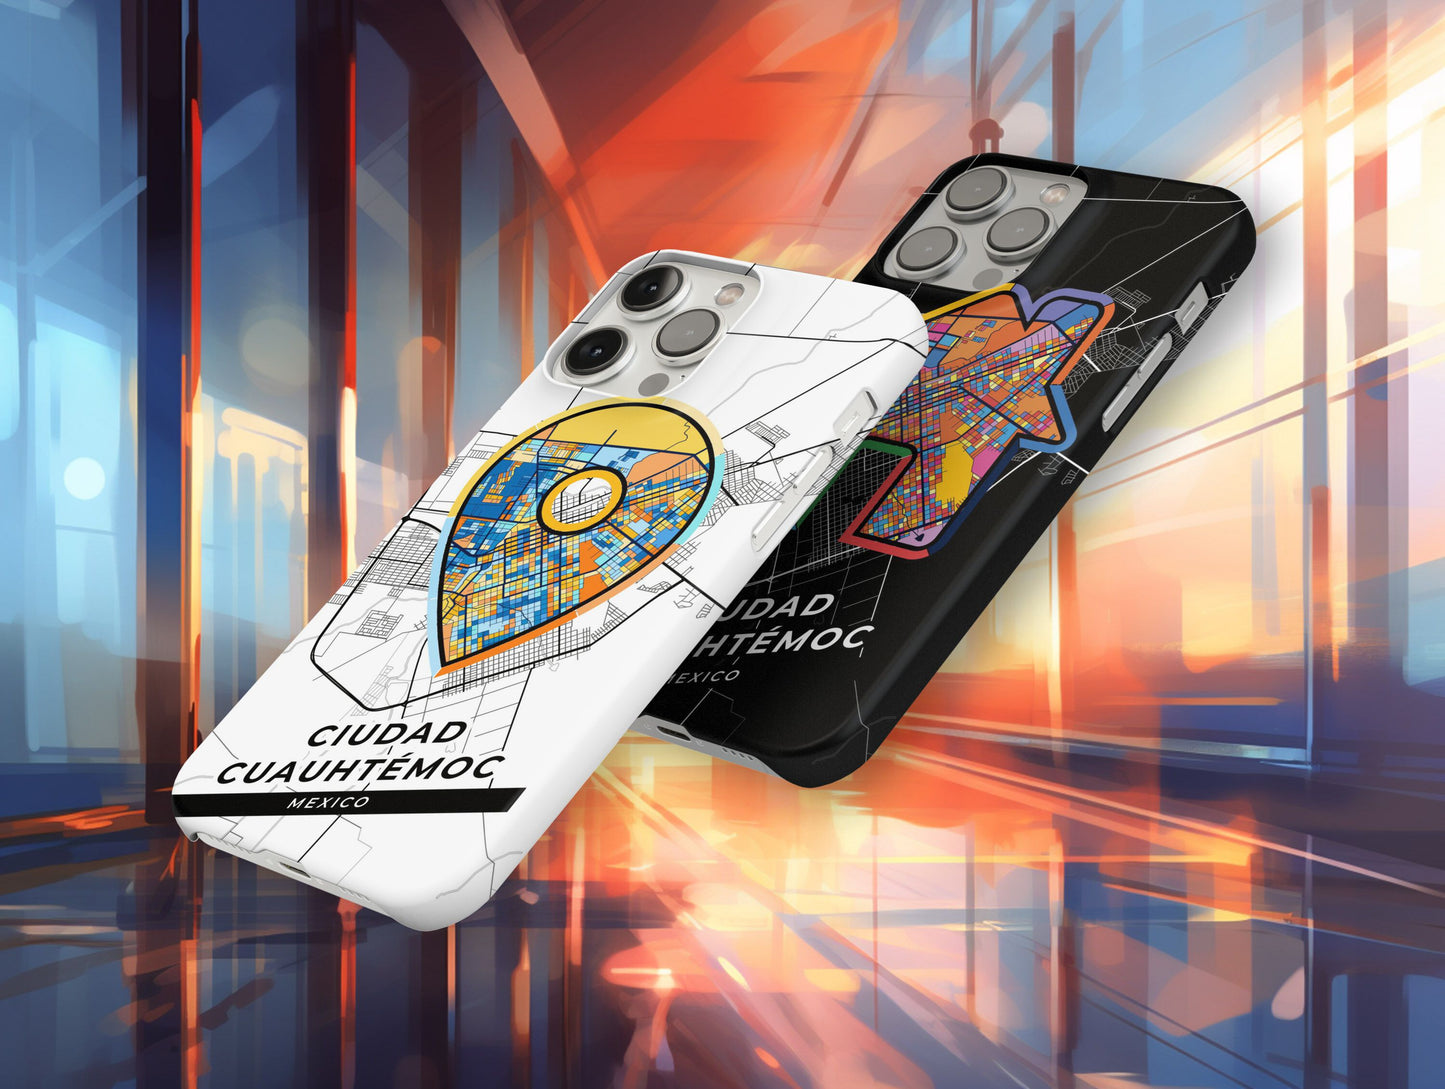 Ciudad Cuauhtémoc Mexico slim phone case with colorful icon. Birthday, wedding or housewarming gift. Couple match cases.